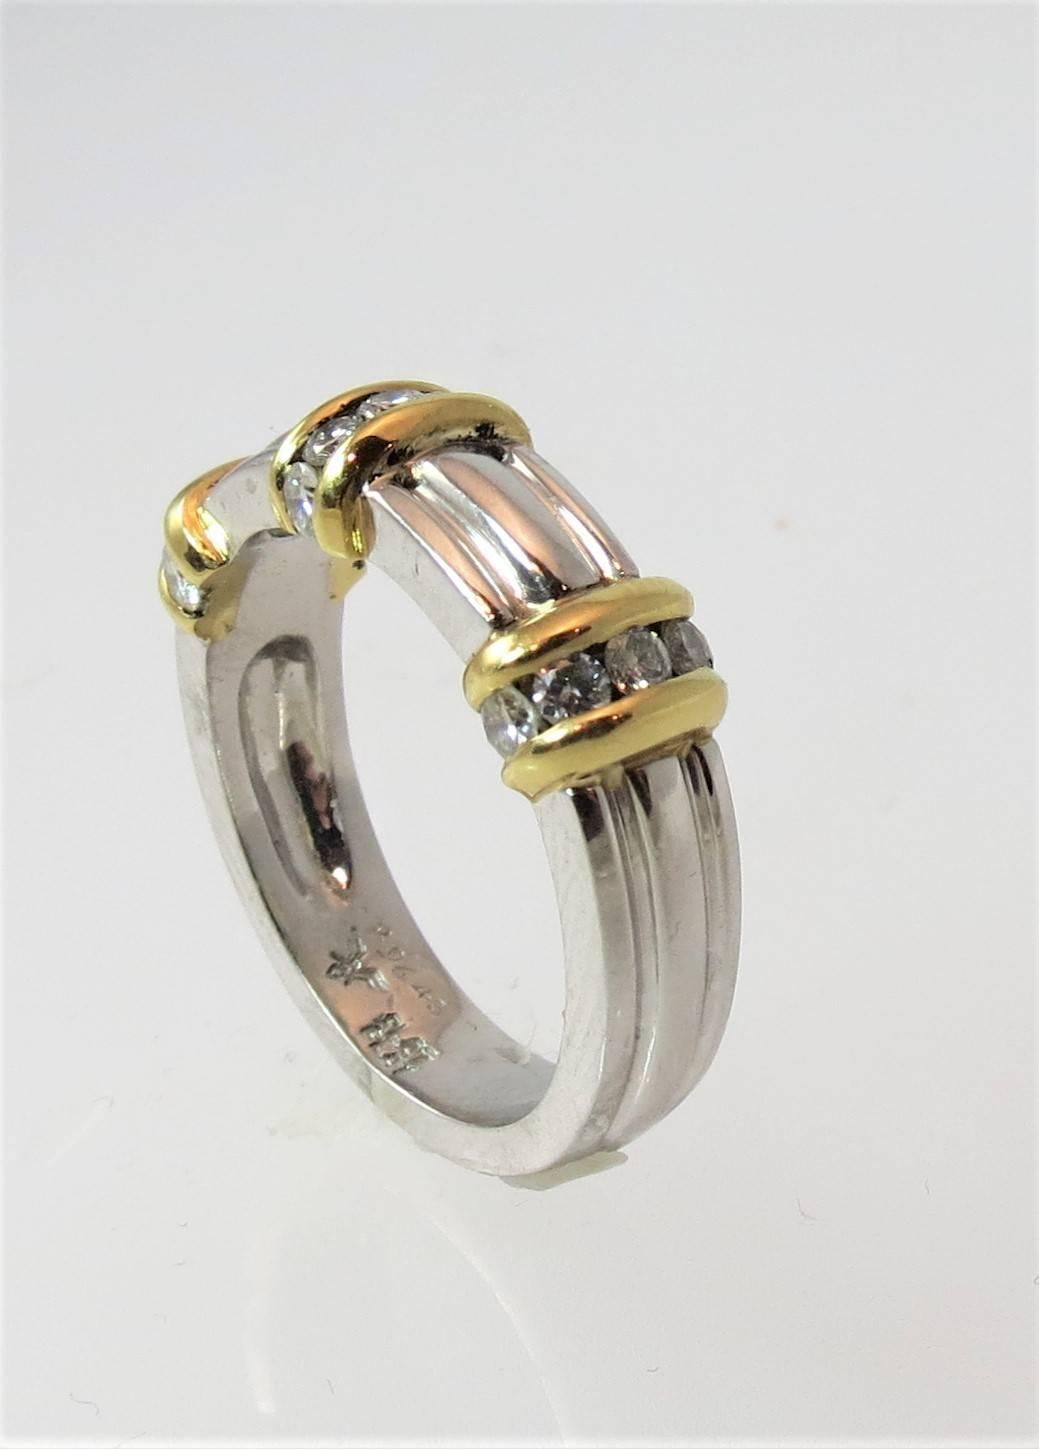 Gents Platinum and 18K yellow gold diamond band ring set with 15 full cut round diamonds weighing 68cts
Finger size 9.5, may be sized